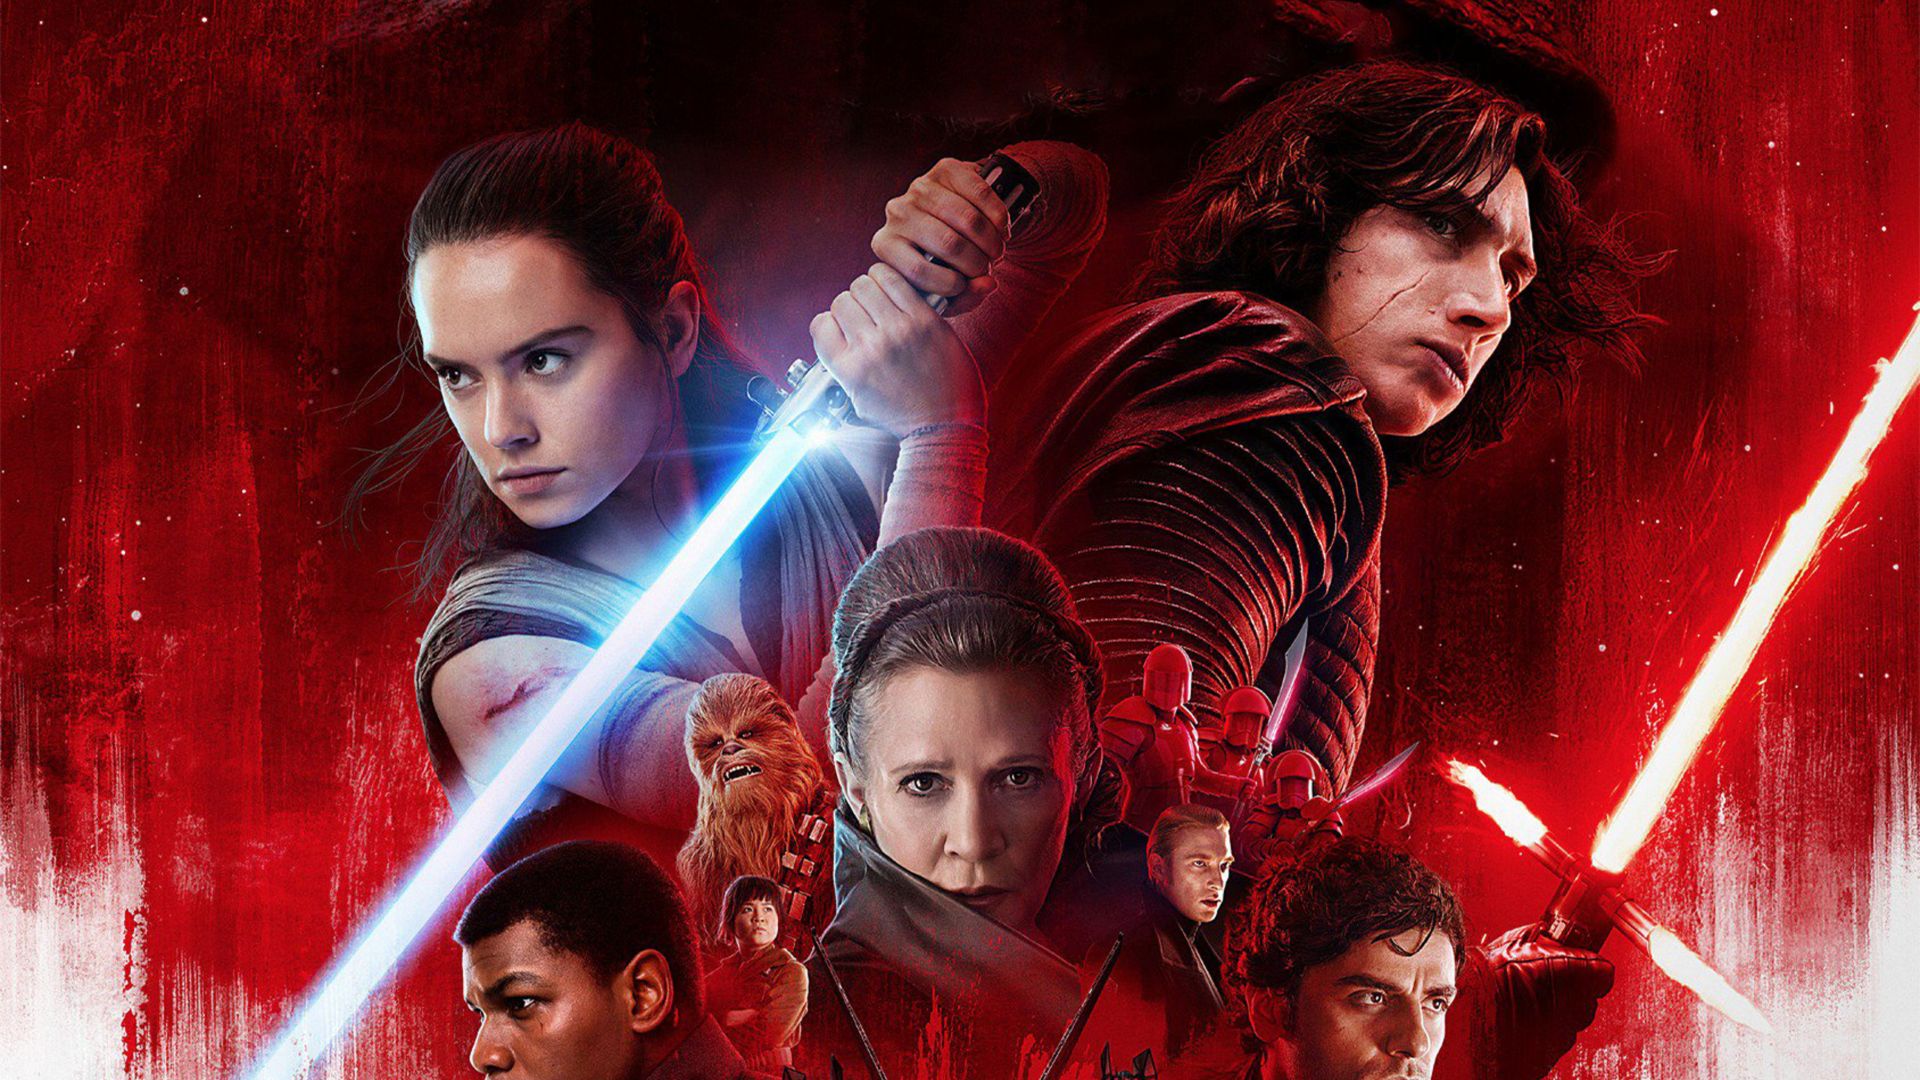 Star Wars: The Last Jedi, Daisy Ridley, Carrie Fisher, Adam Driver, poster, 4k (horizontal)